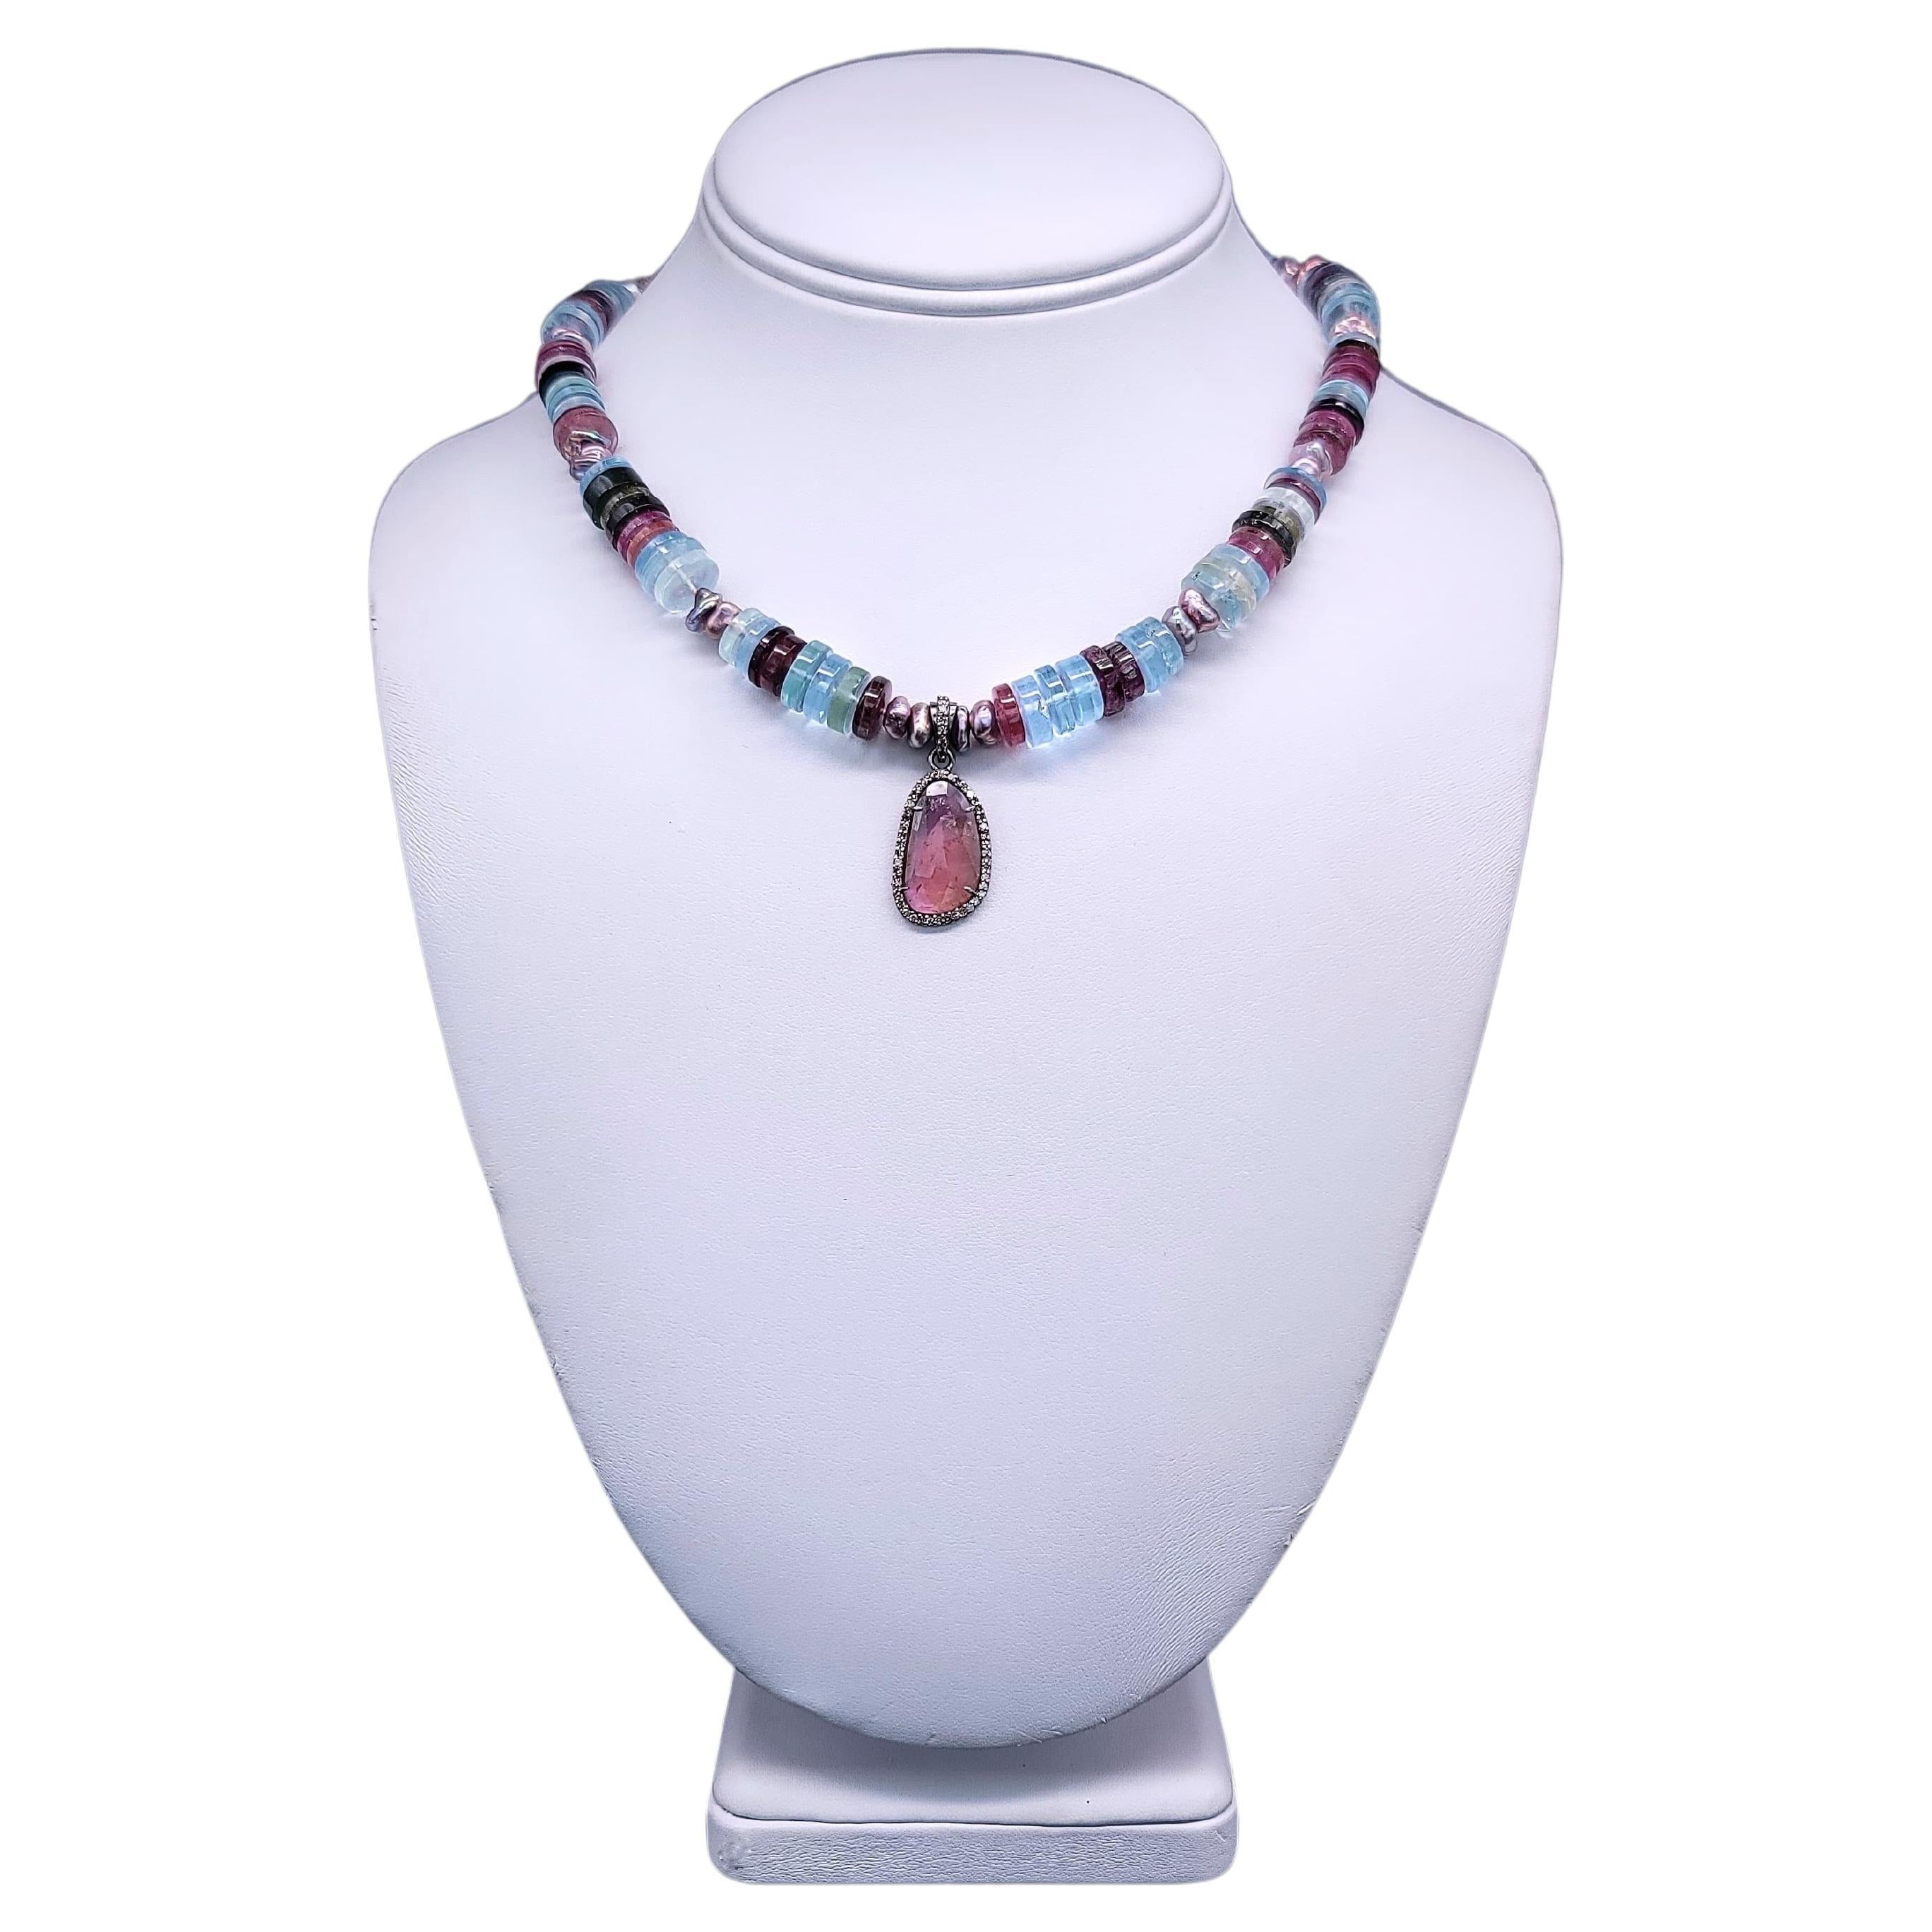 A.Jeschel Tourmaline and Aquamarine cleverly merge in a gentle ladylike necklace